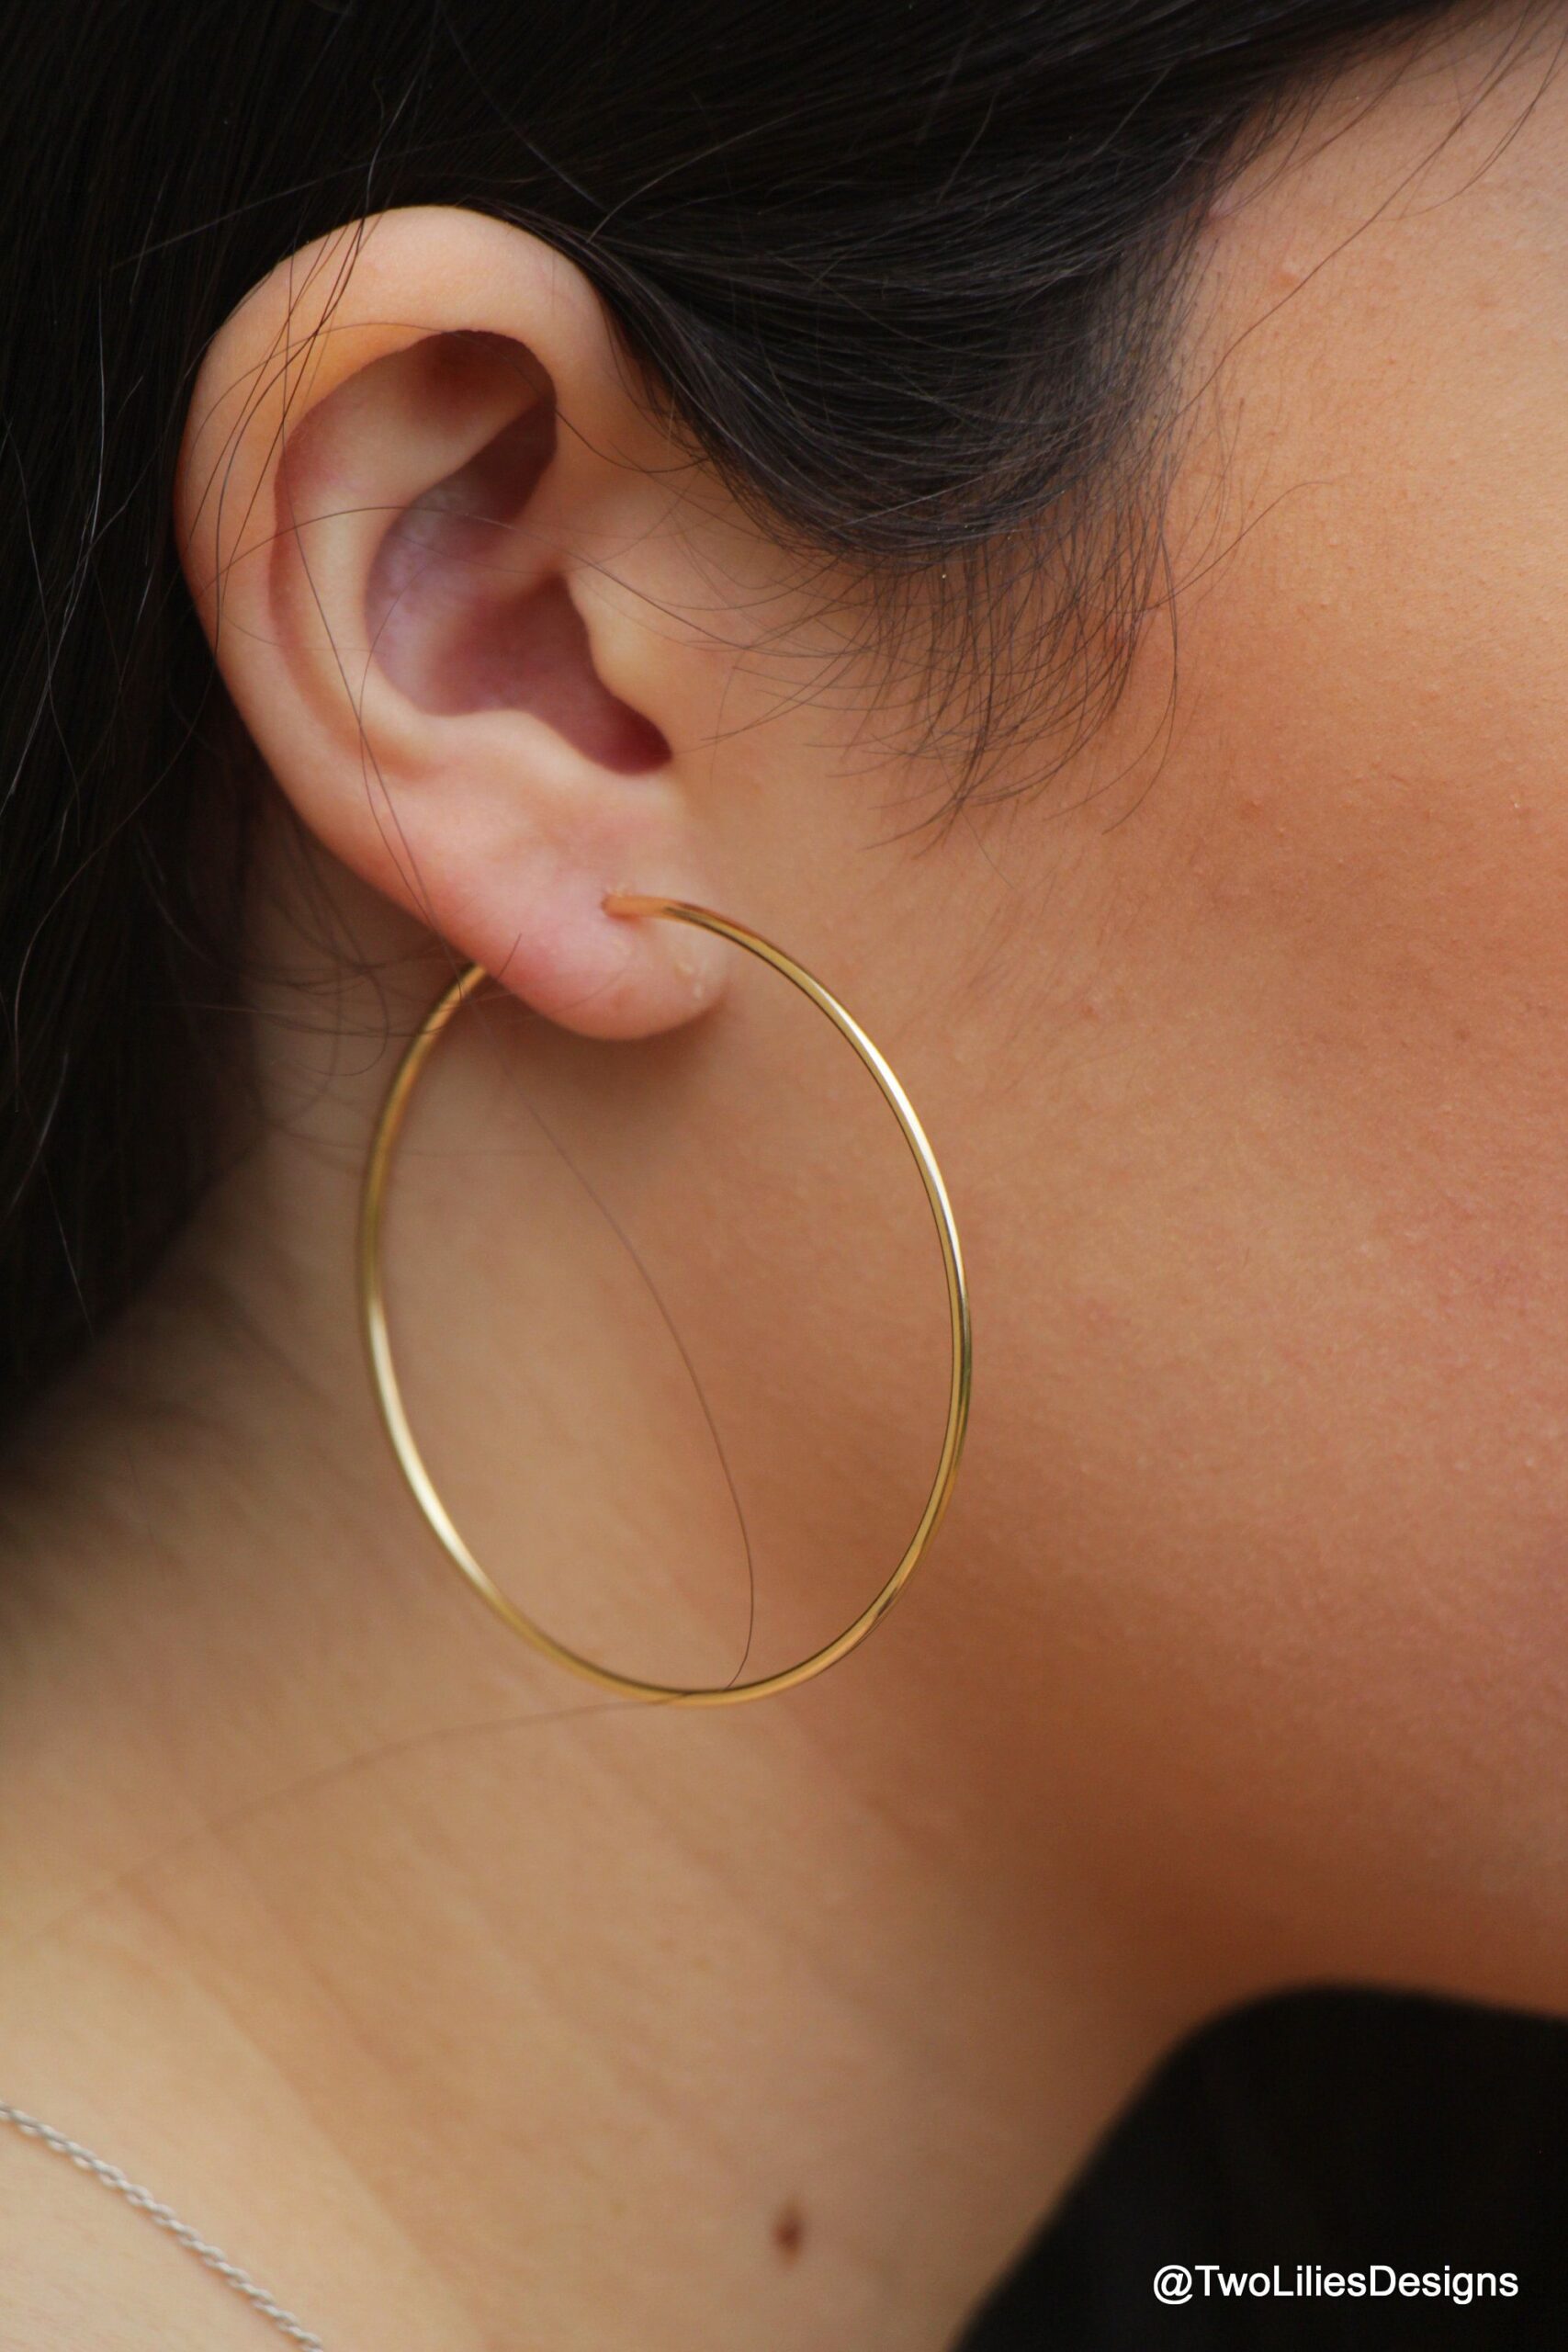 Fashion icon must try large hoop earrings